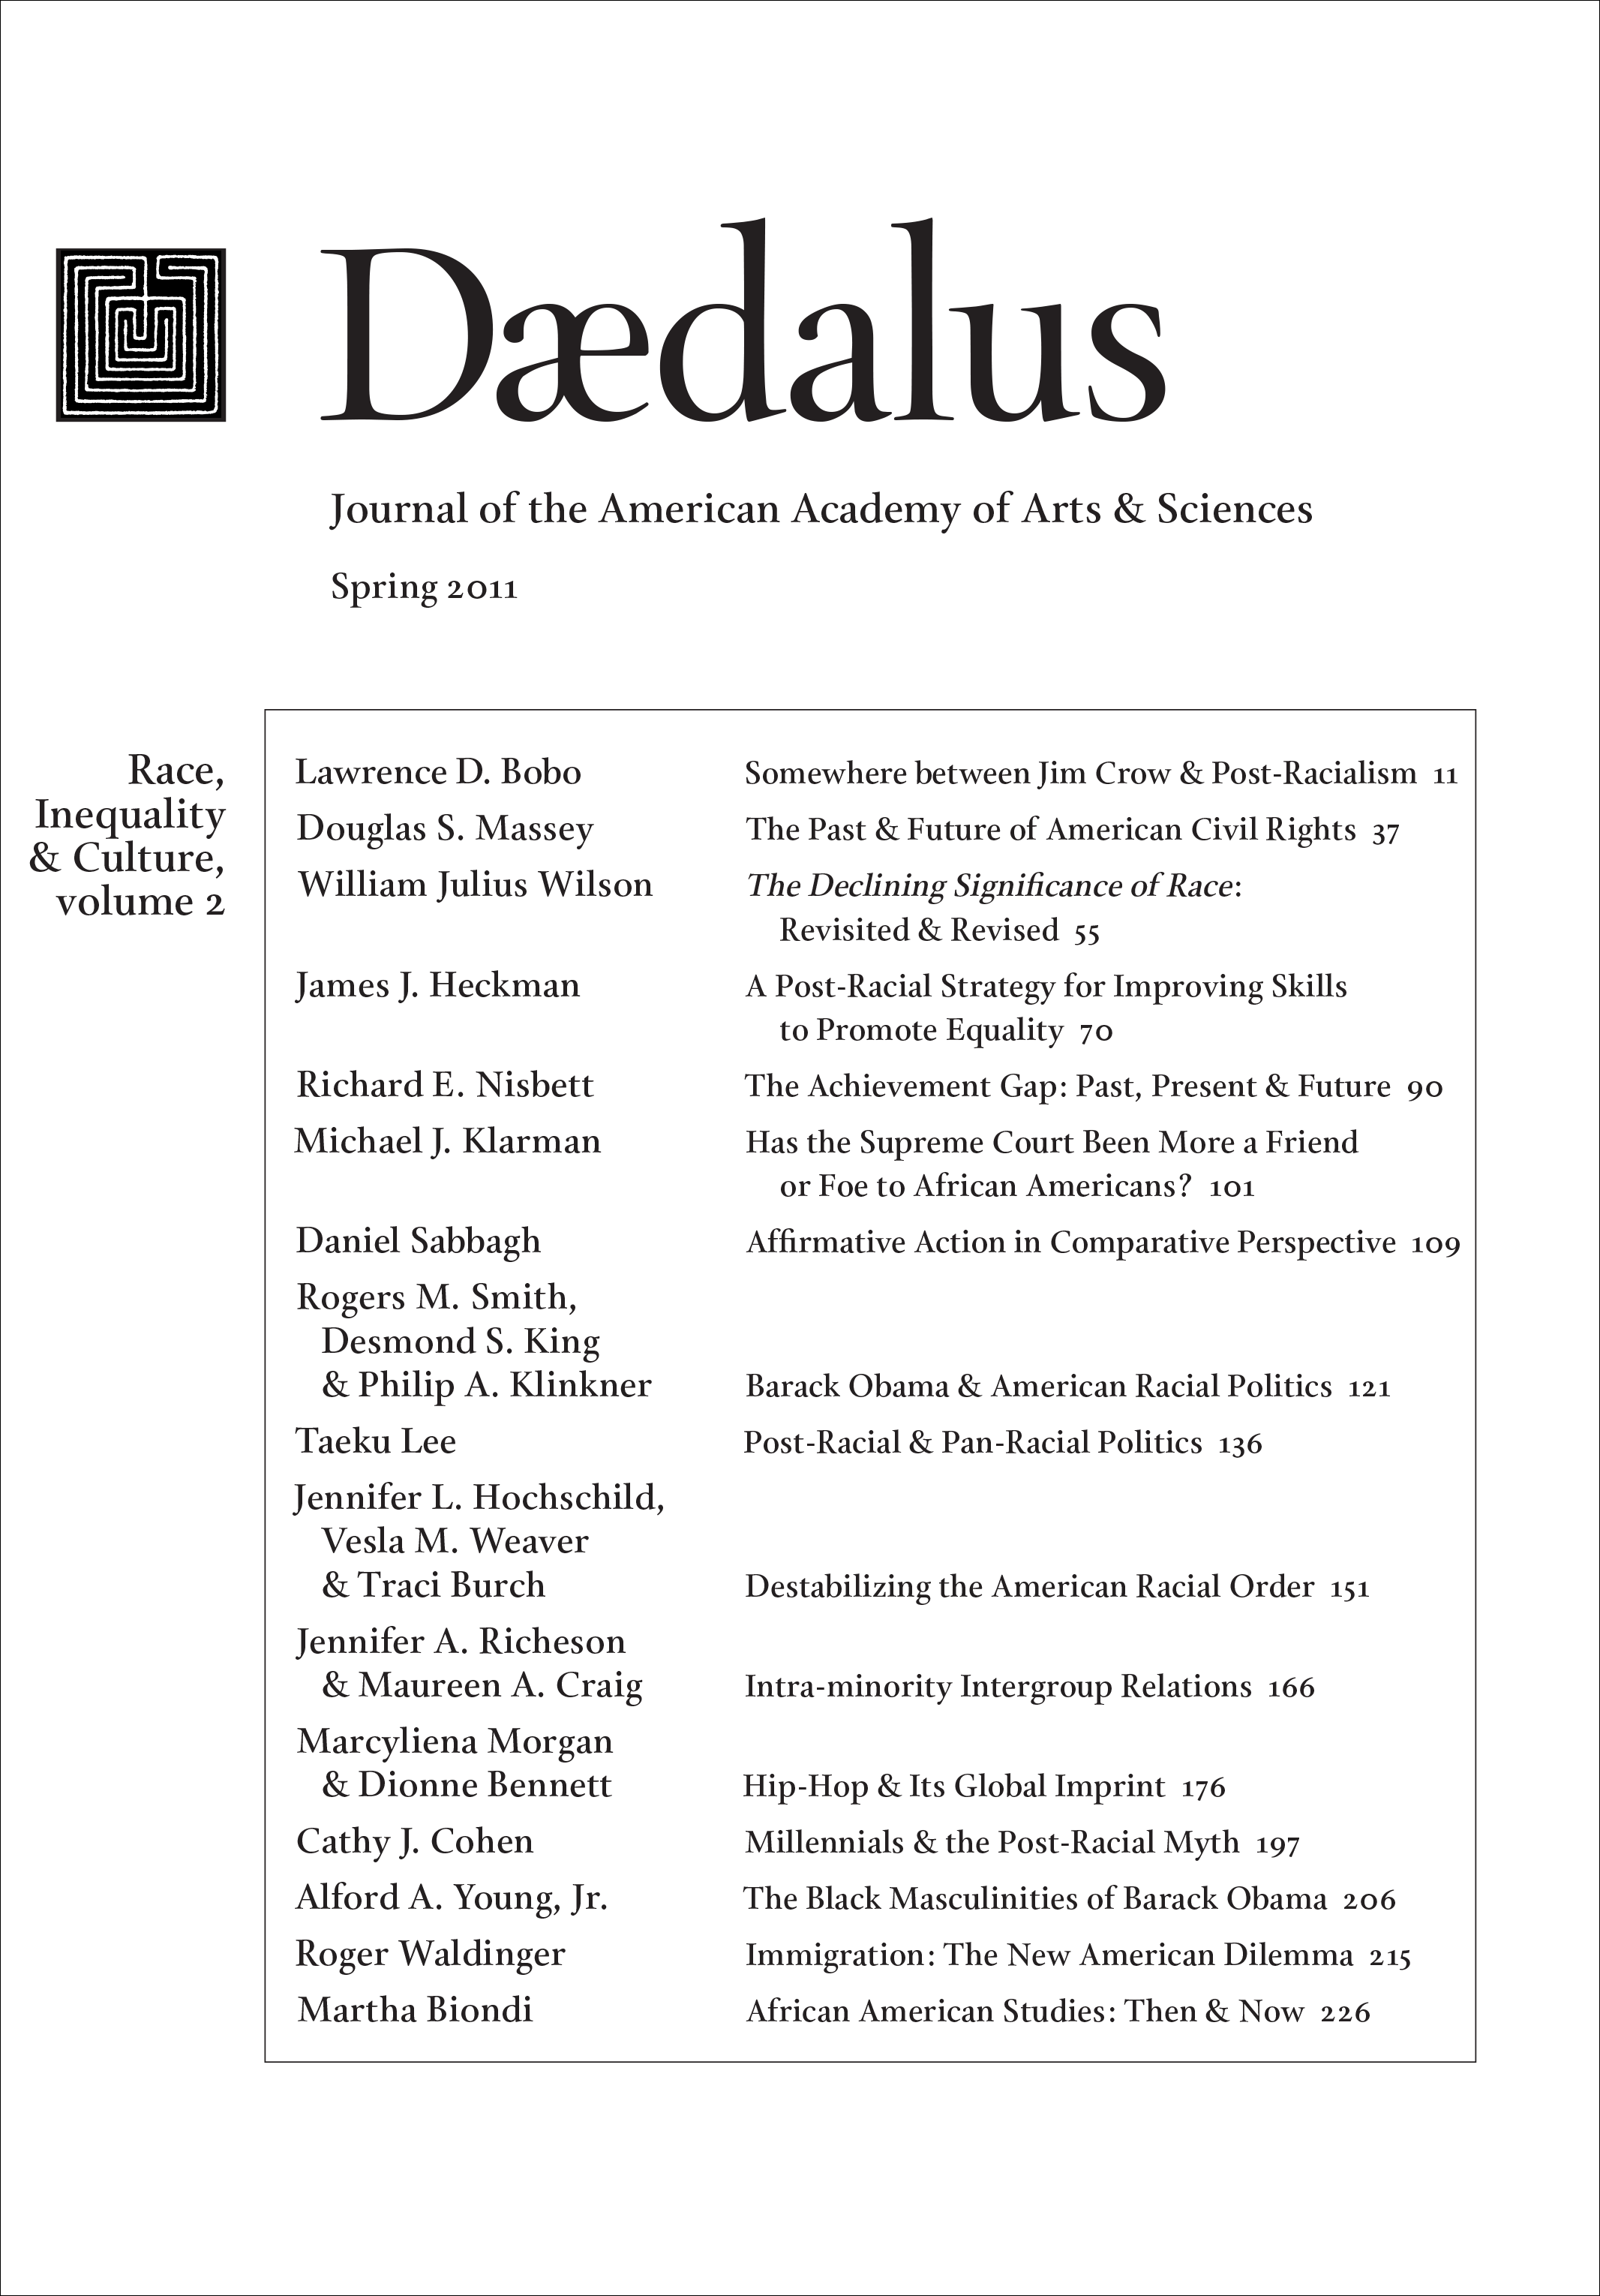 https://www.amacad.org/sites/default/files/daedalus/covers/daedalus_cover_11sp.png